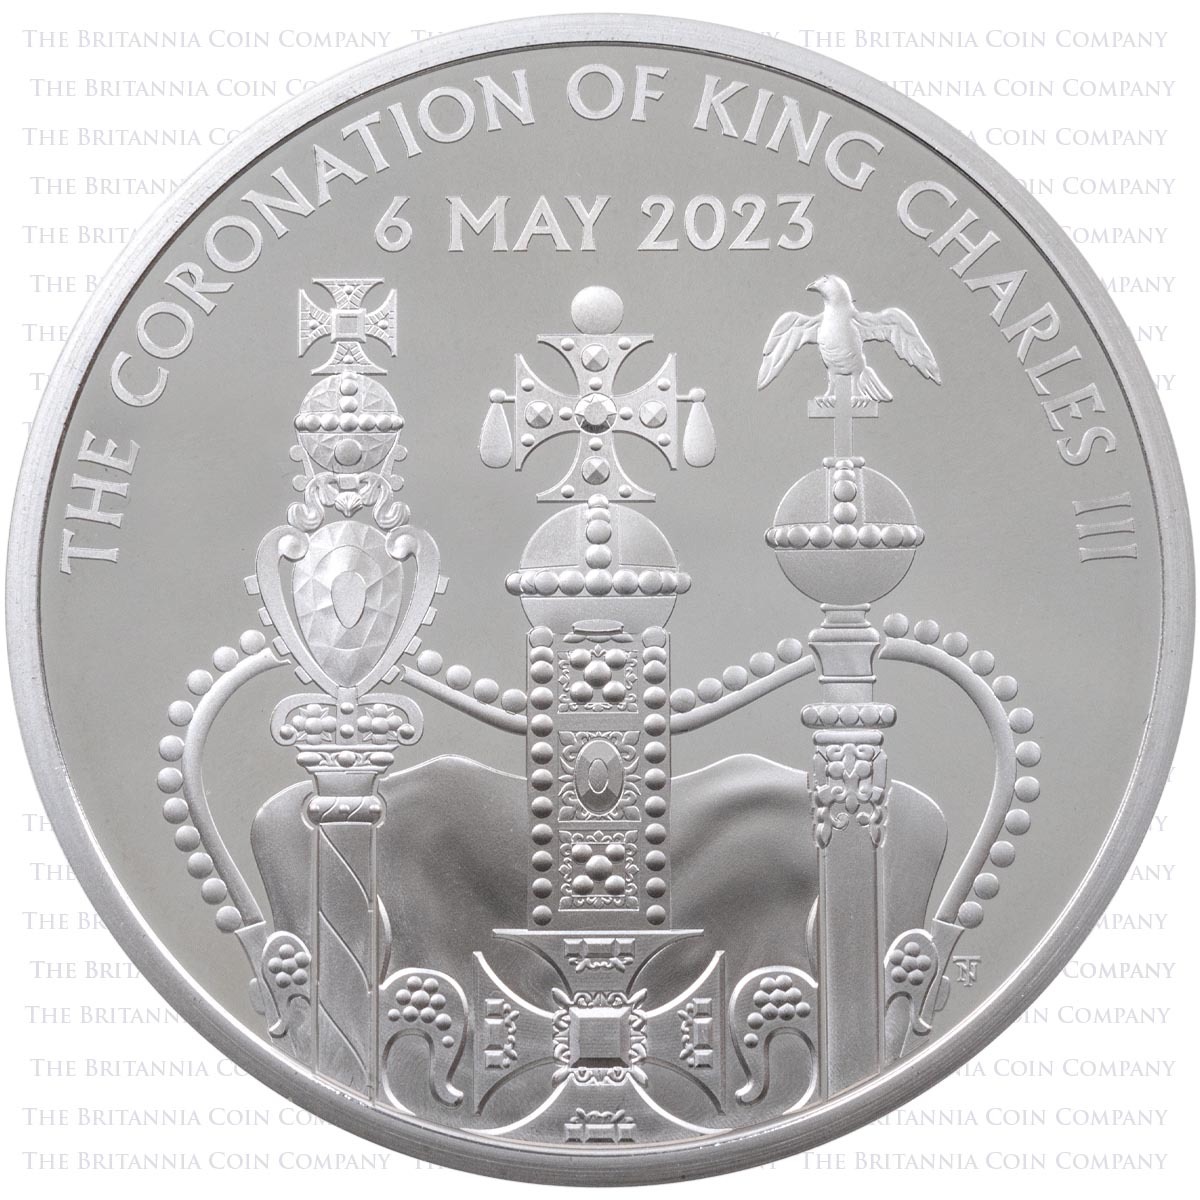 UK23KCPF 2023 King Charles III Coronation Five Pound Crown Piedfort Silver Proof Coin Reverse